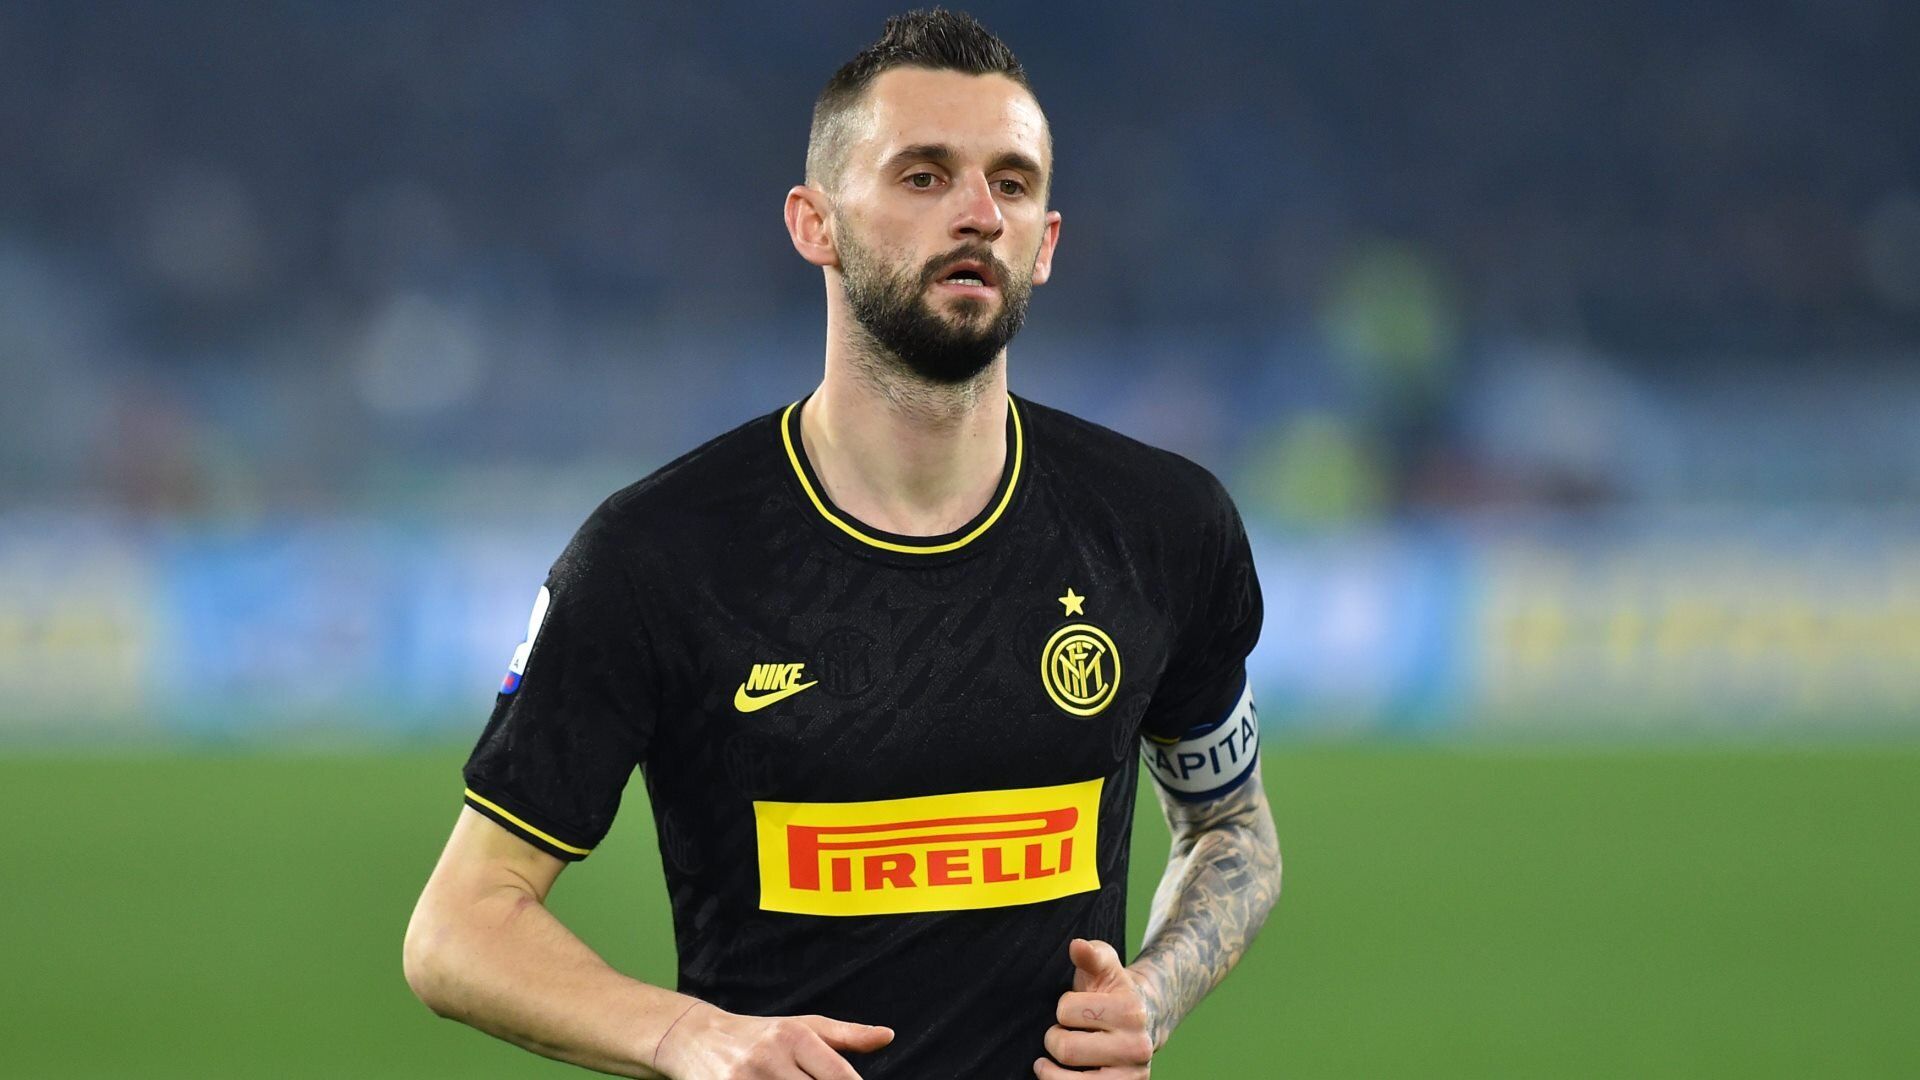 CdS gives green light to sell Brozovic. With him and Perisic to Bayern Munich, Inter will start talk for Kanté